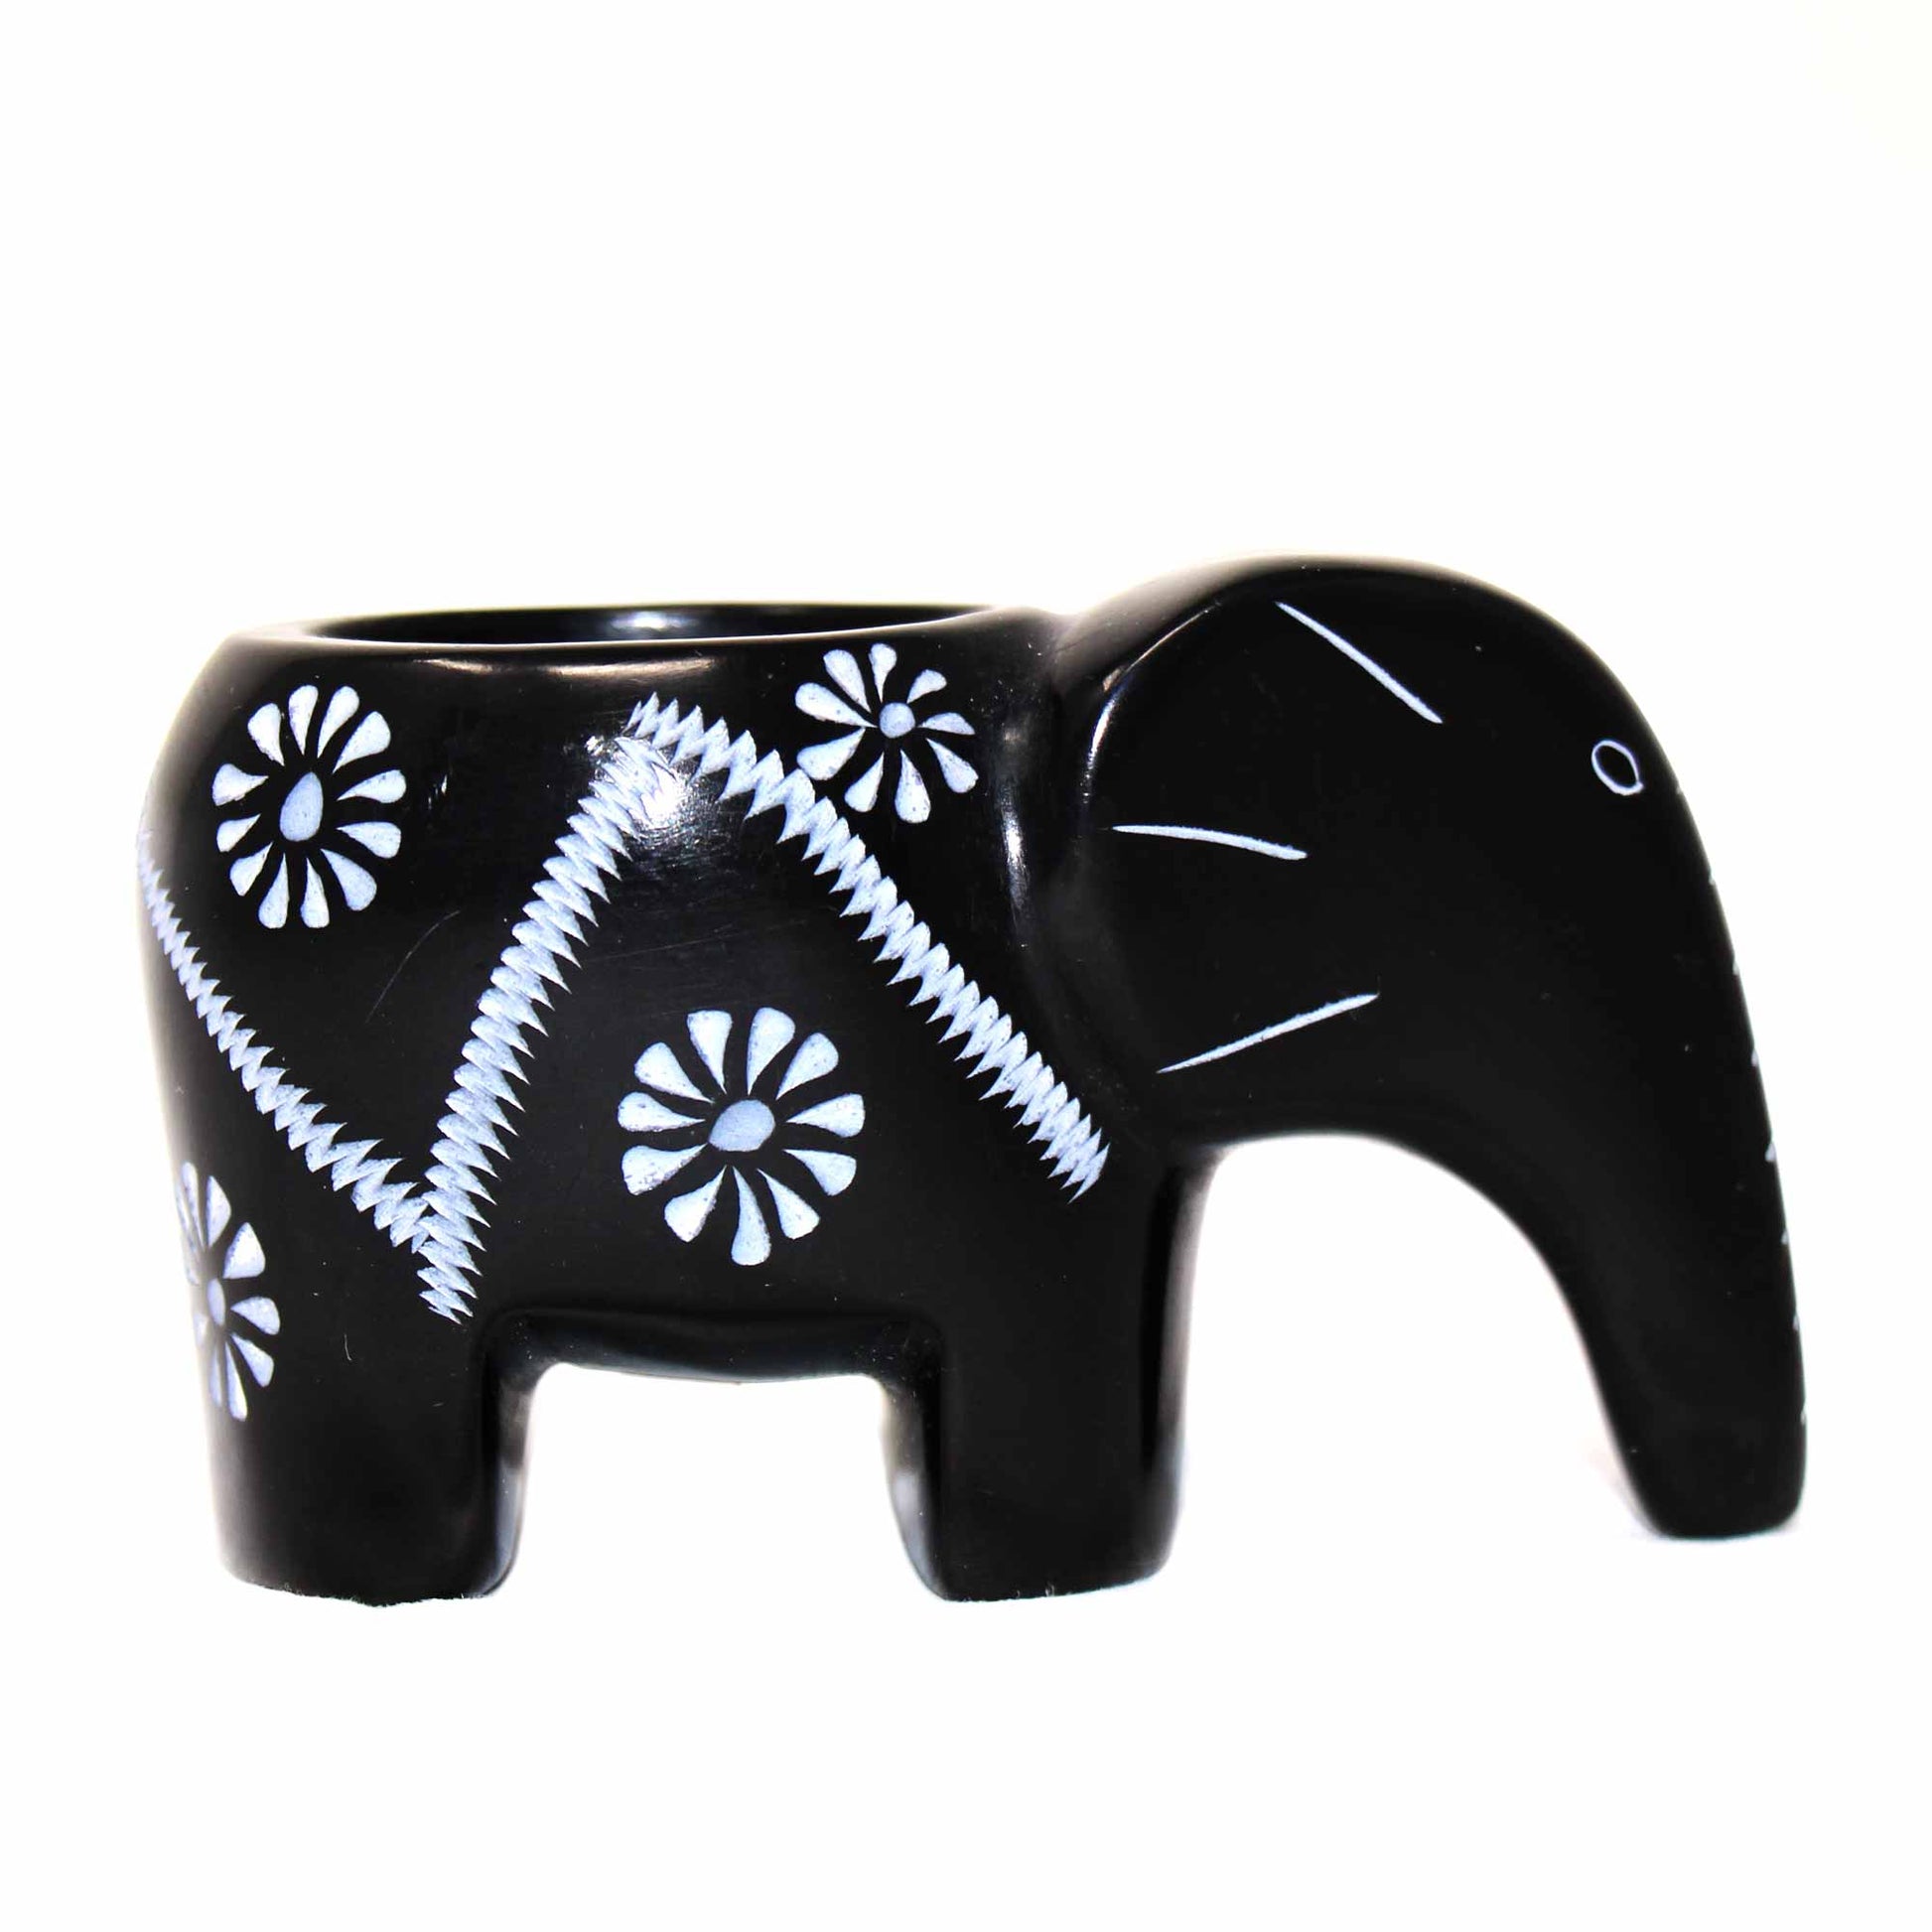 Lucky Elephant Soapstone Tea Light; Black Finish with Etched Design 4"l x  2.5"t x 1.75"w - Linda Kay Gifford’s - Those Nasty Women TALK! by SWEETSurvivor